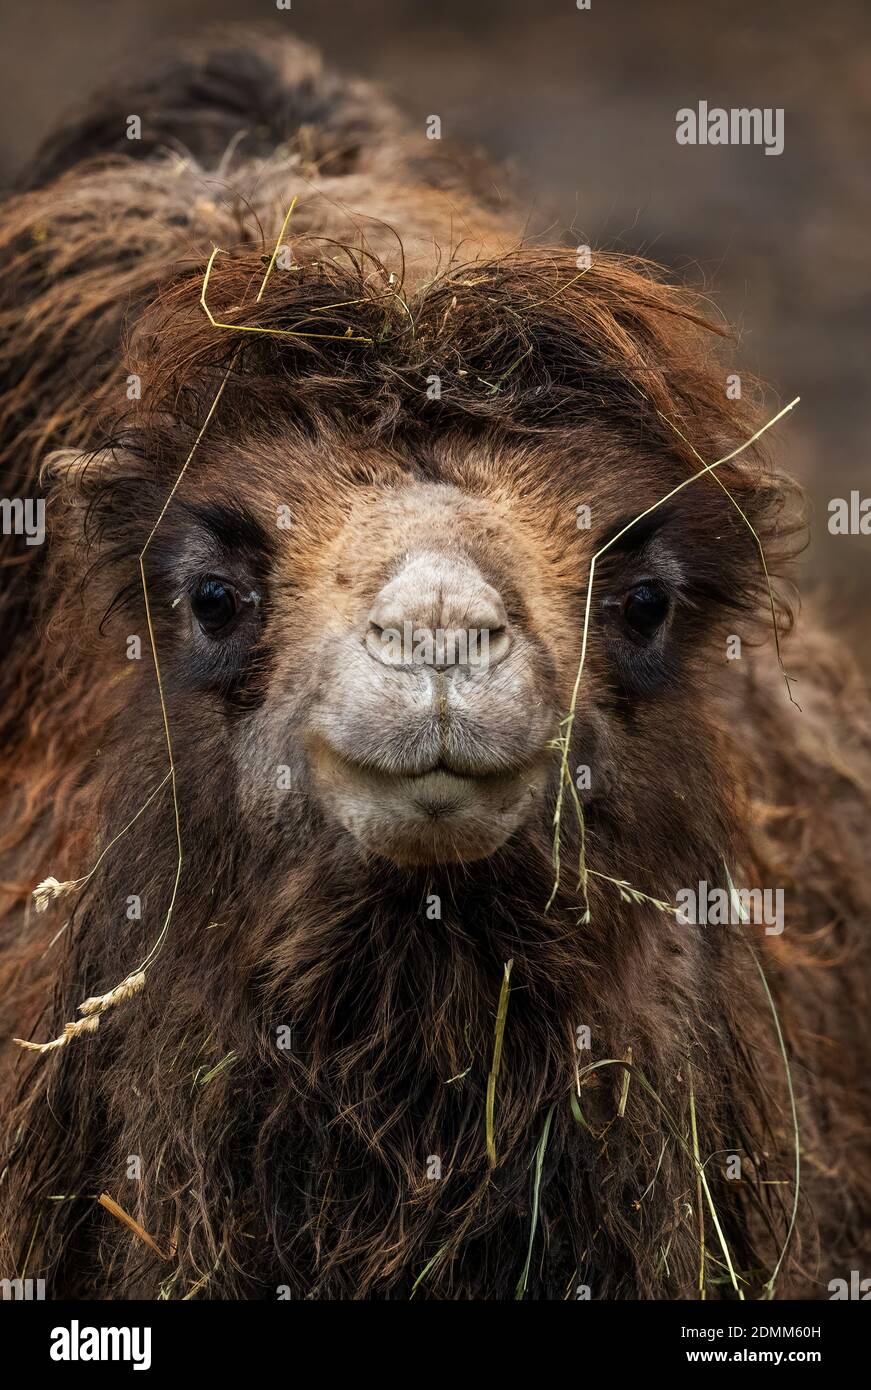 Bactrian Camel - Camelus bactrianus, large mammal from Asian deserts and steppes, Mongolia. Stock Photo